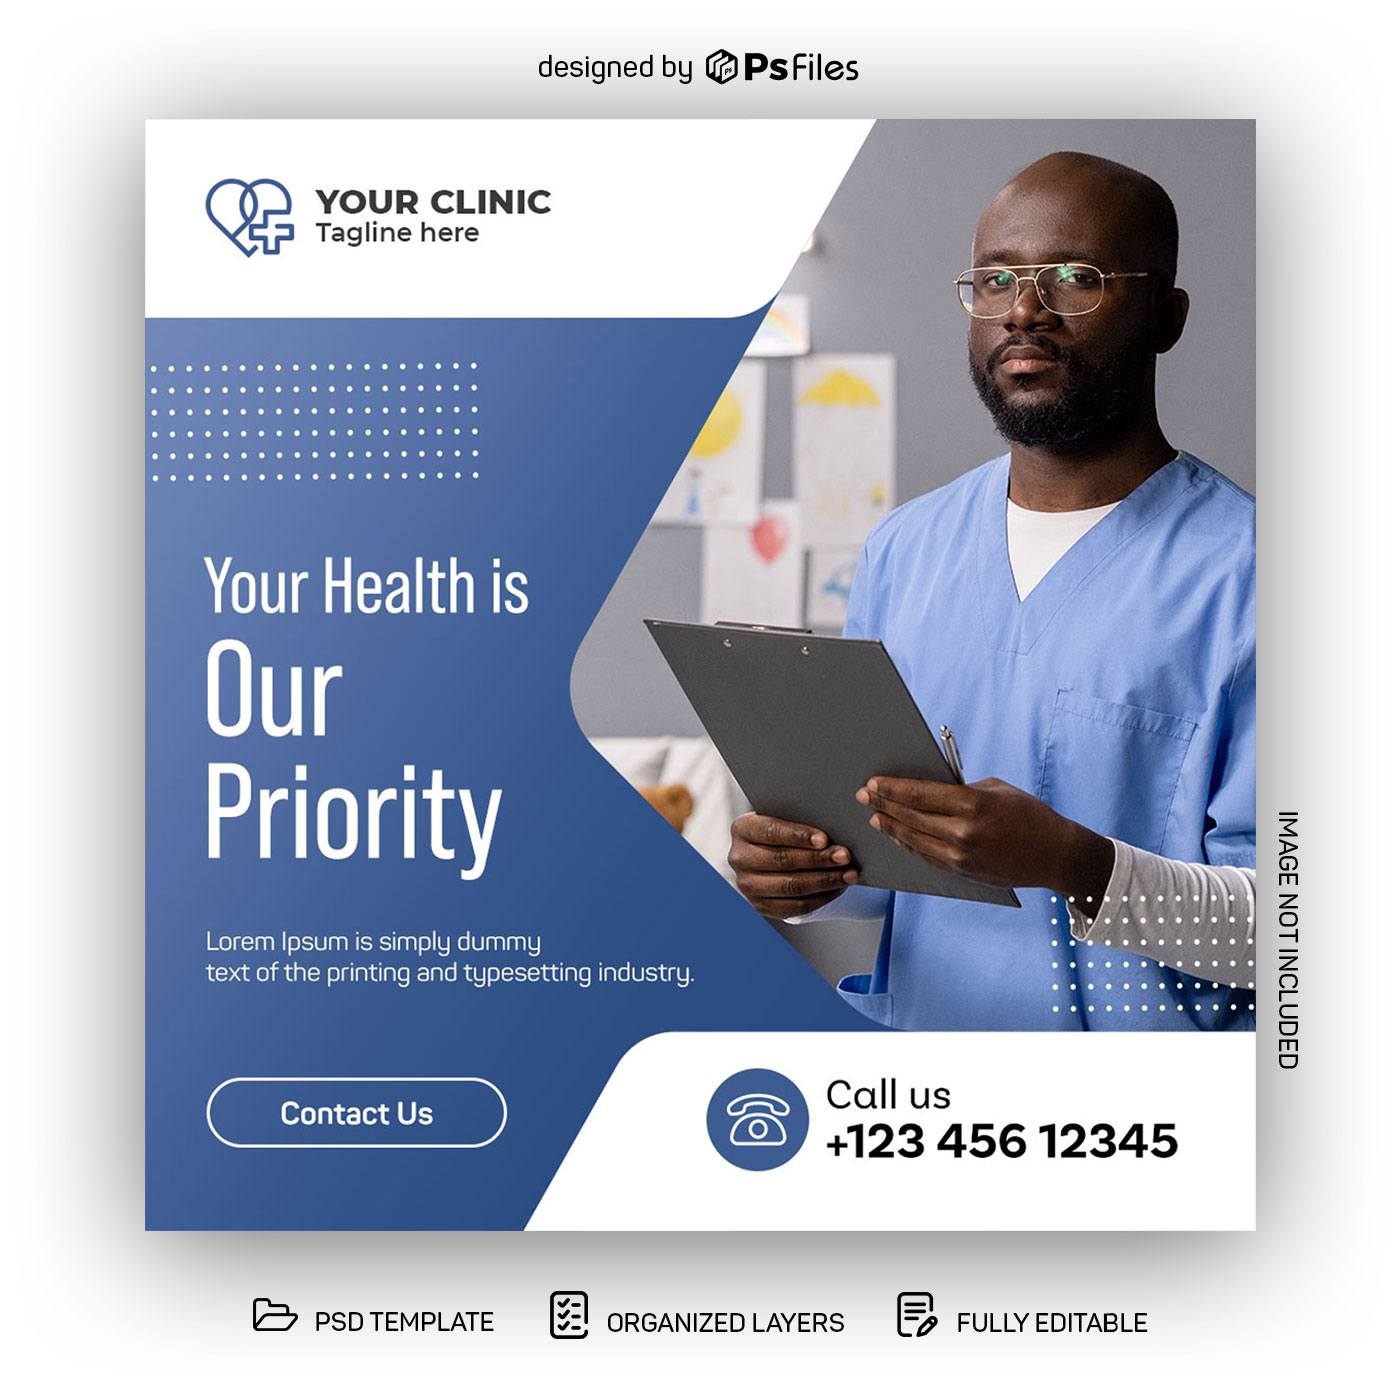 PsFiles Free Instagram Post Design PSD Template for Health Care